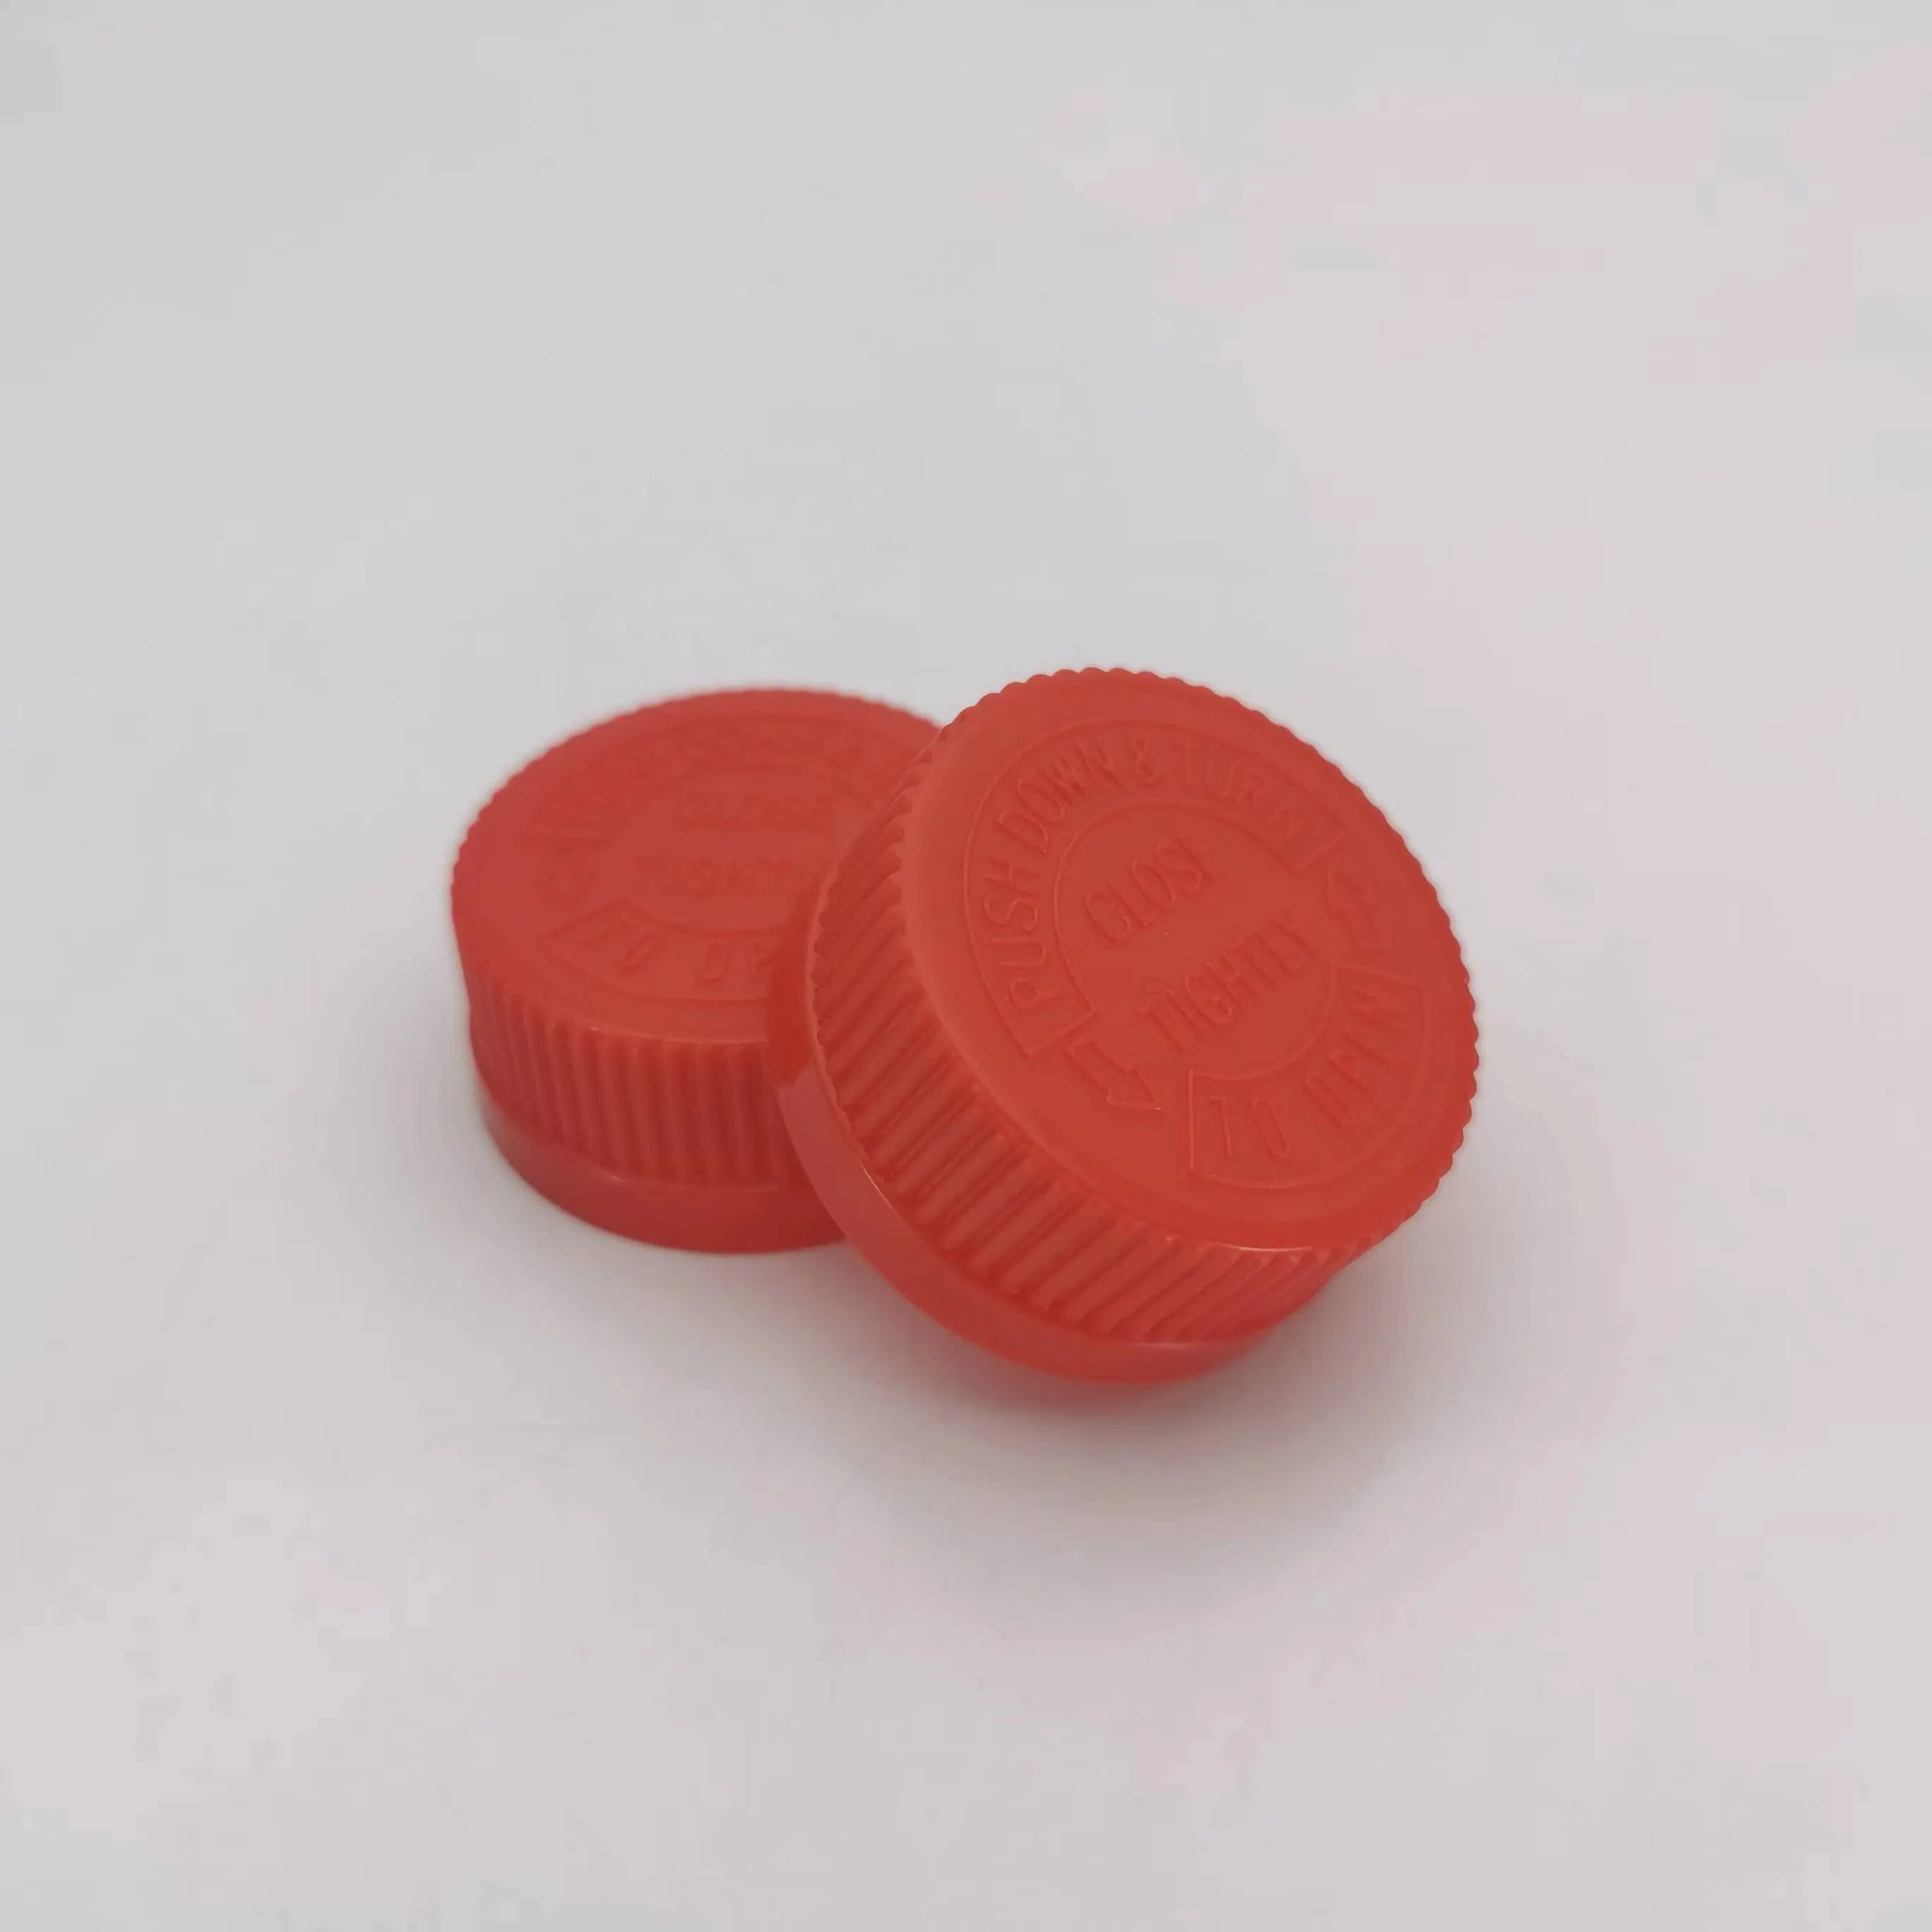 32mm Child Resistant Cap Ribbed Side Double Wall Plastic Cap